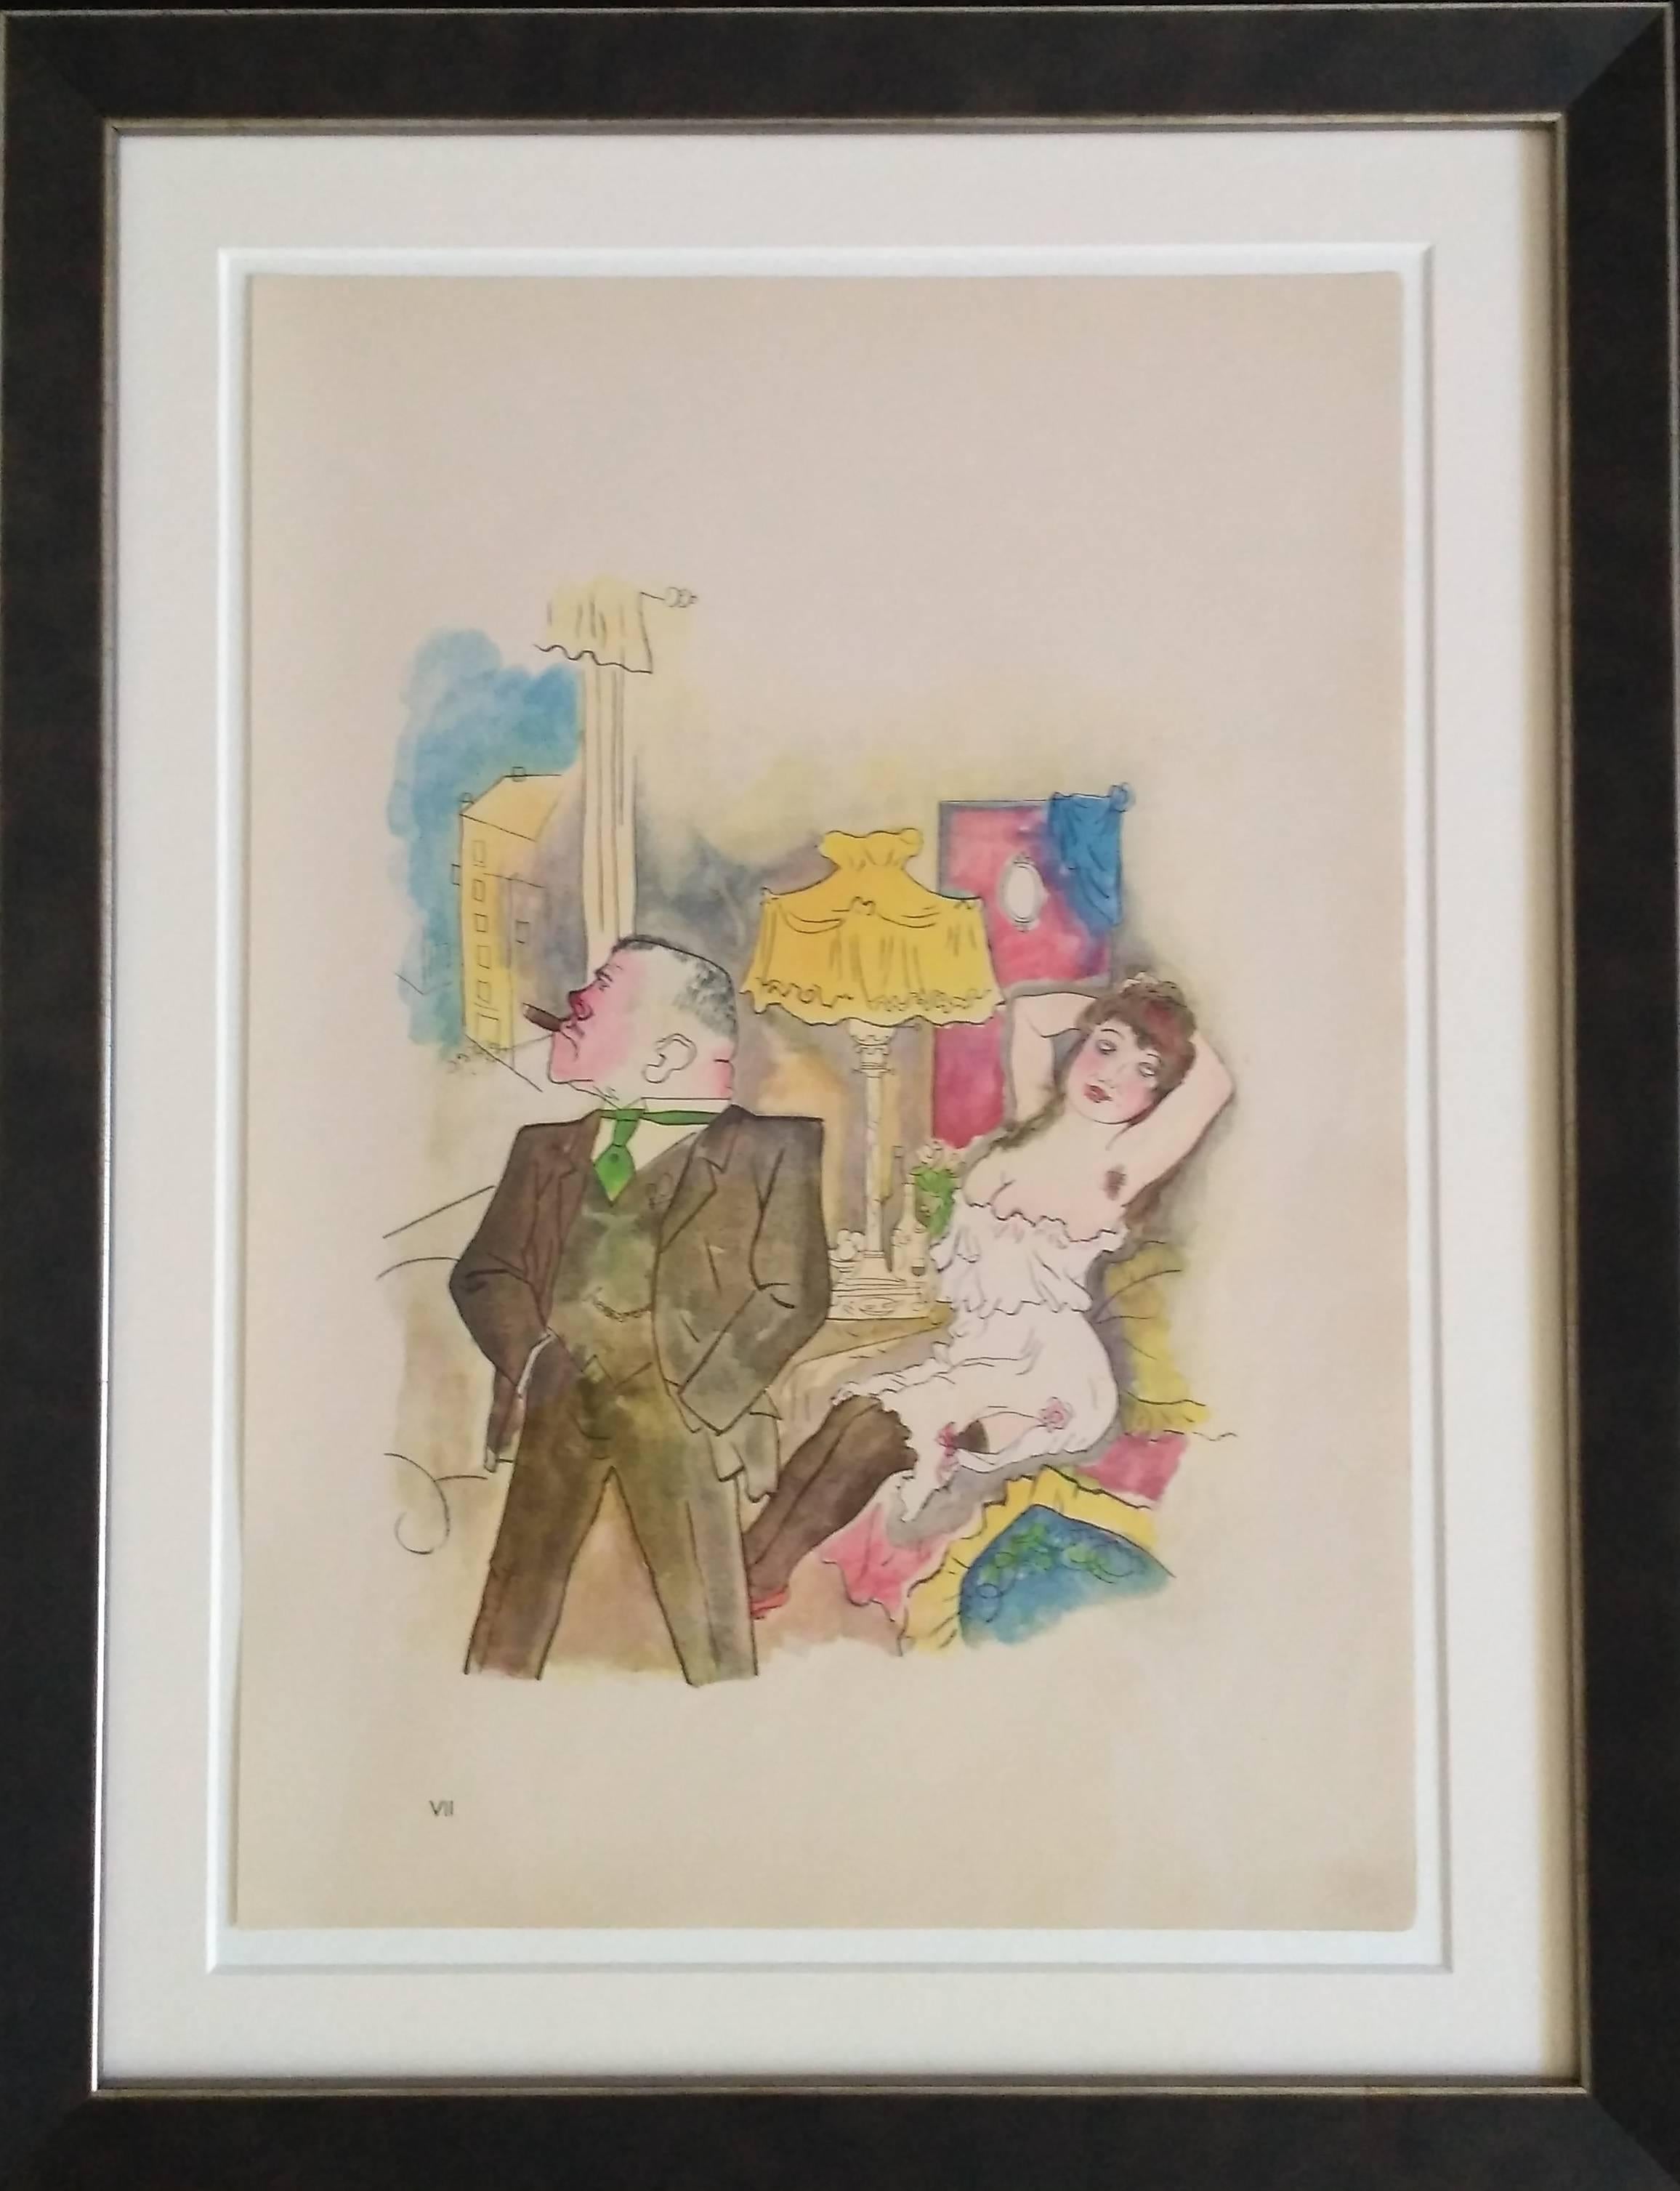 (after) George Grosz Figurative Print - George Grosz Lithograph "Kraft und Anmut" ( Strength and Grace ), 1922